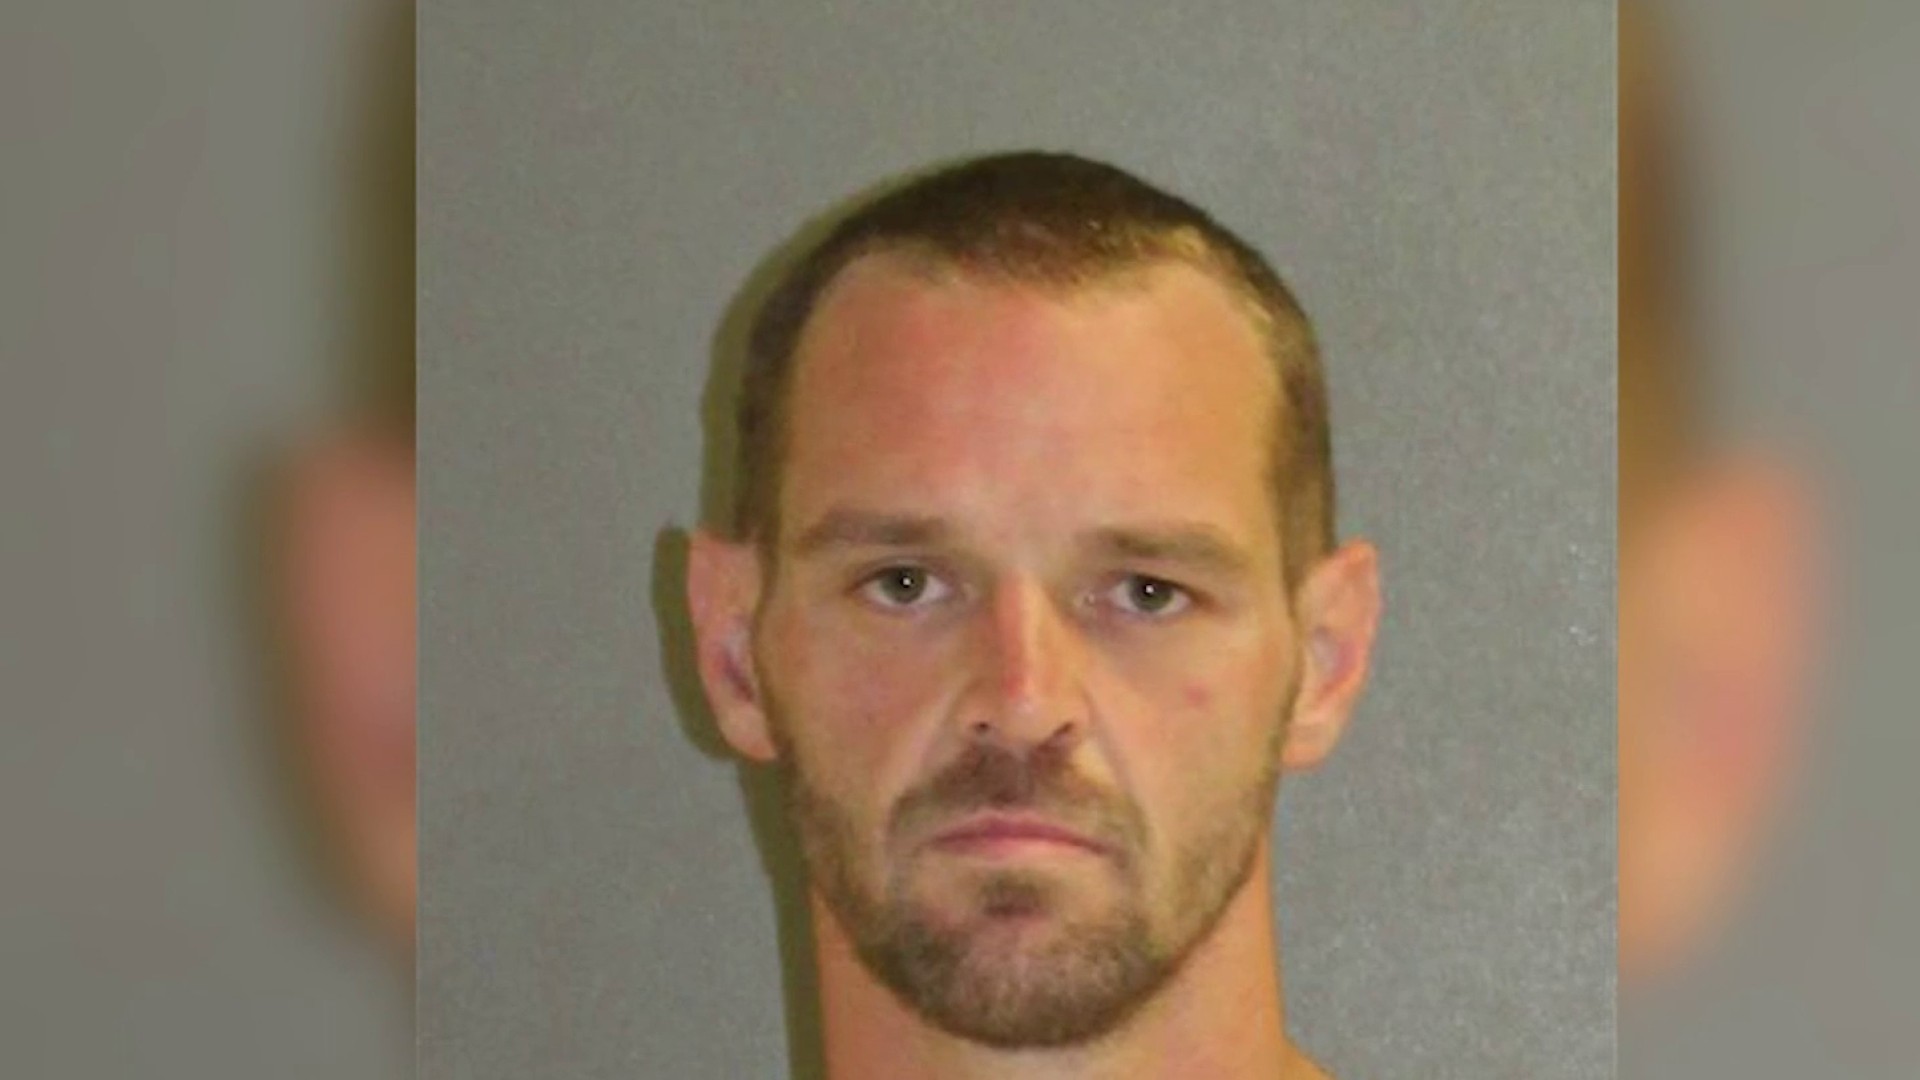 Deputies Man arrested after taking a shower, hanging out naked in familys home